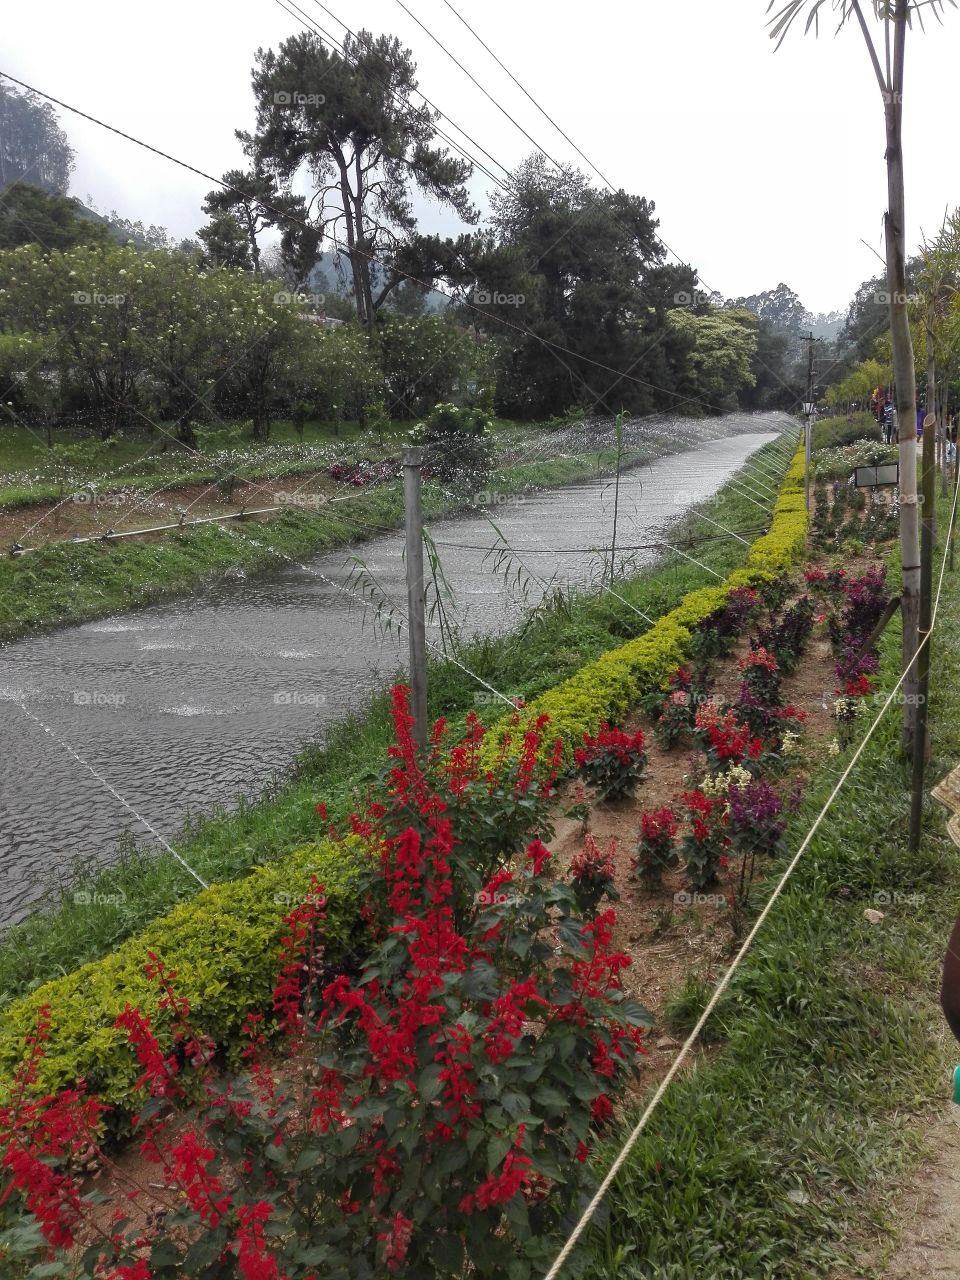 flowers show in Kerala India,chill climate,so nice place